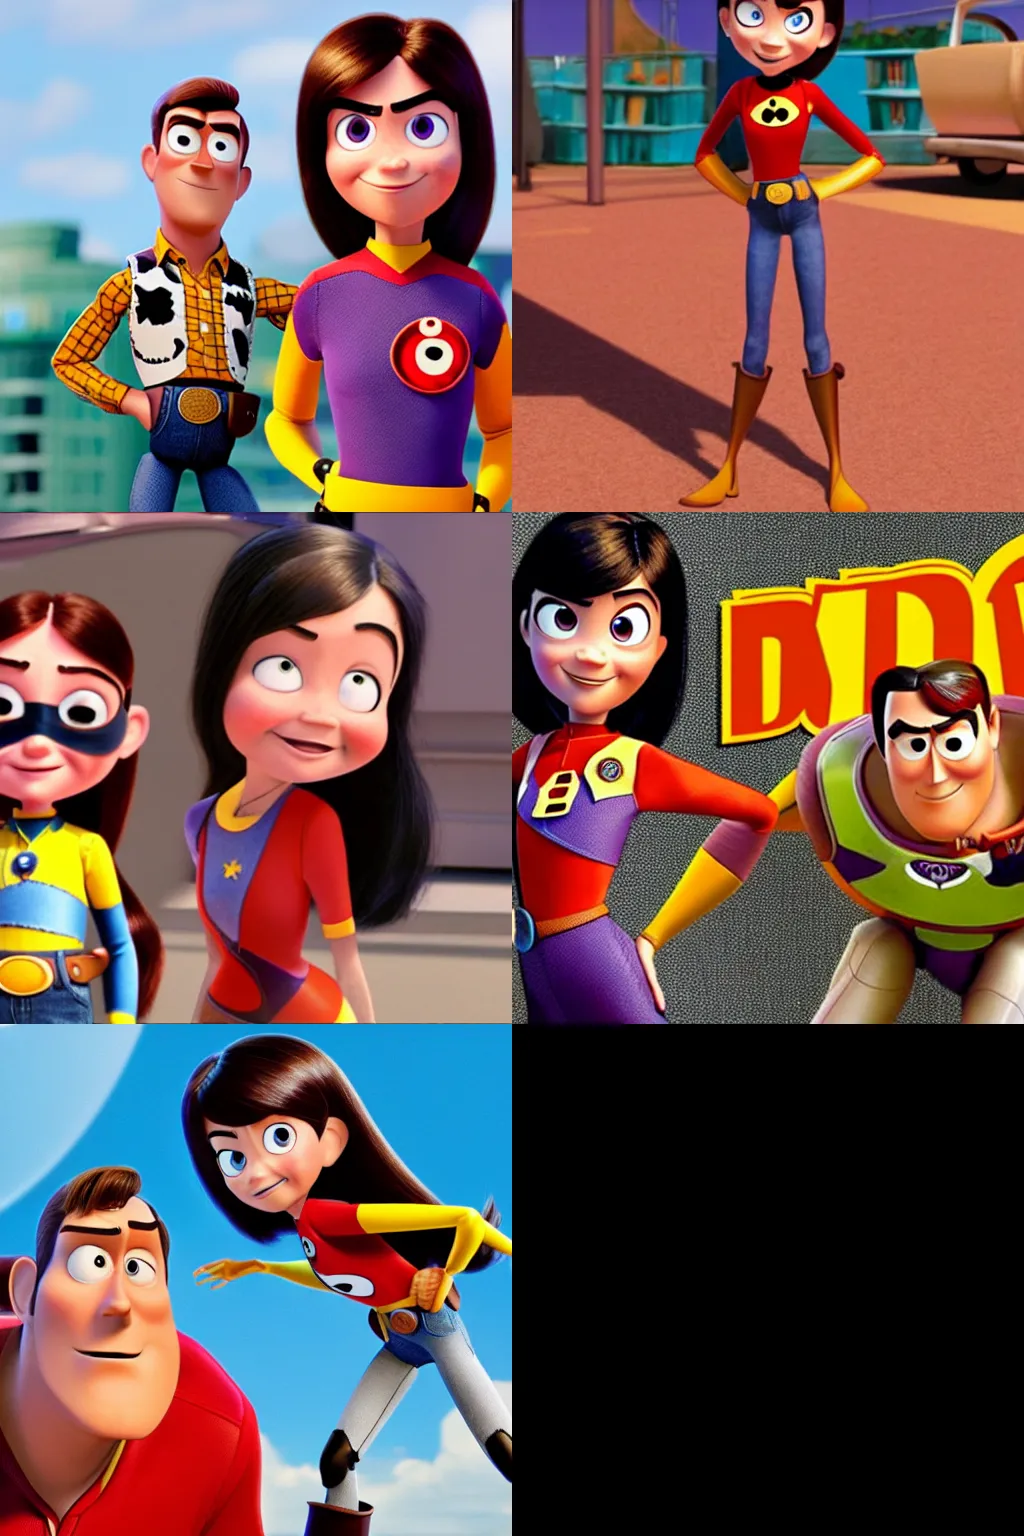 Prompt: violet parr in incredibles 2 style meets woody from movie toy story 4